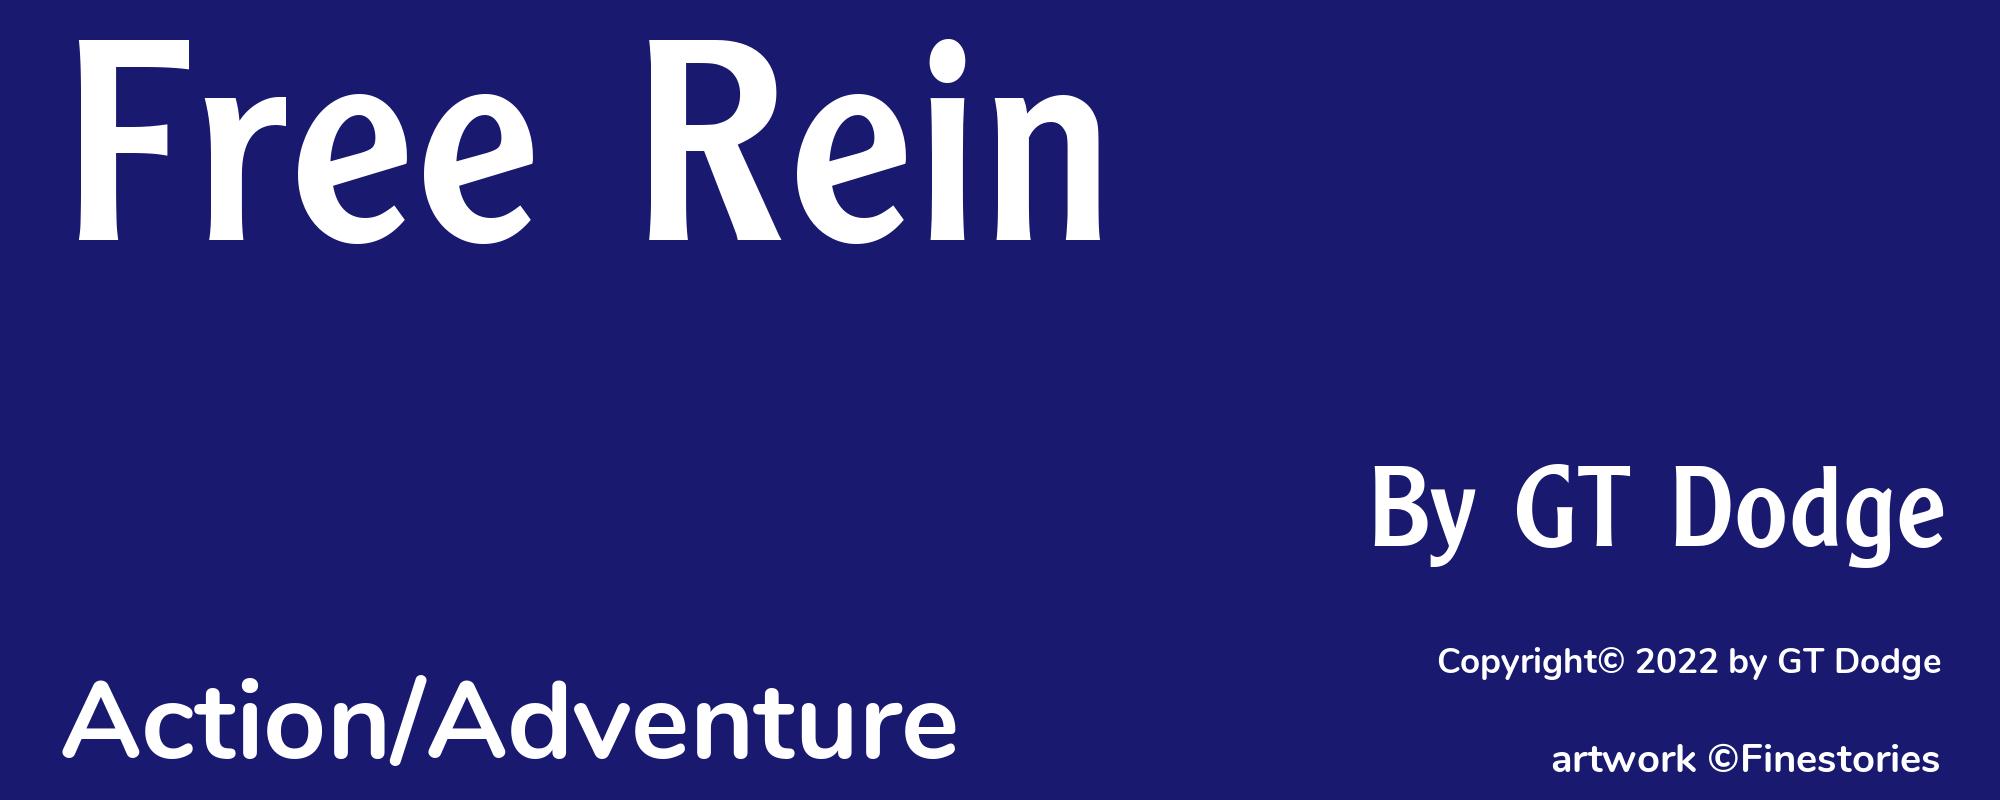 Free Rein - Cover